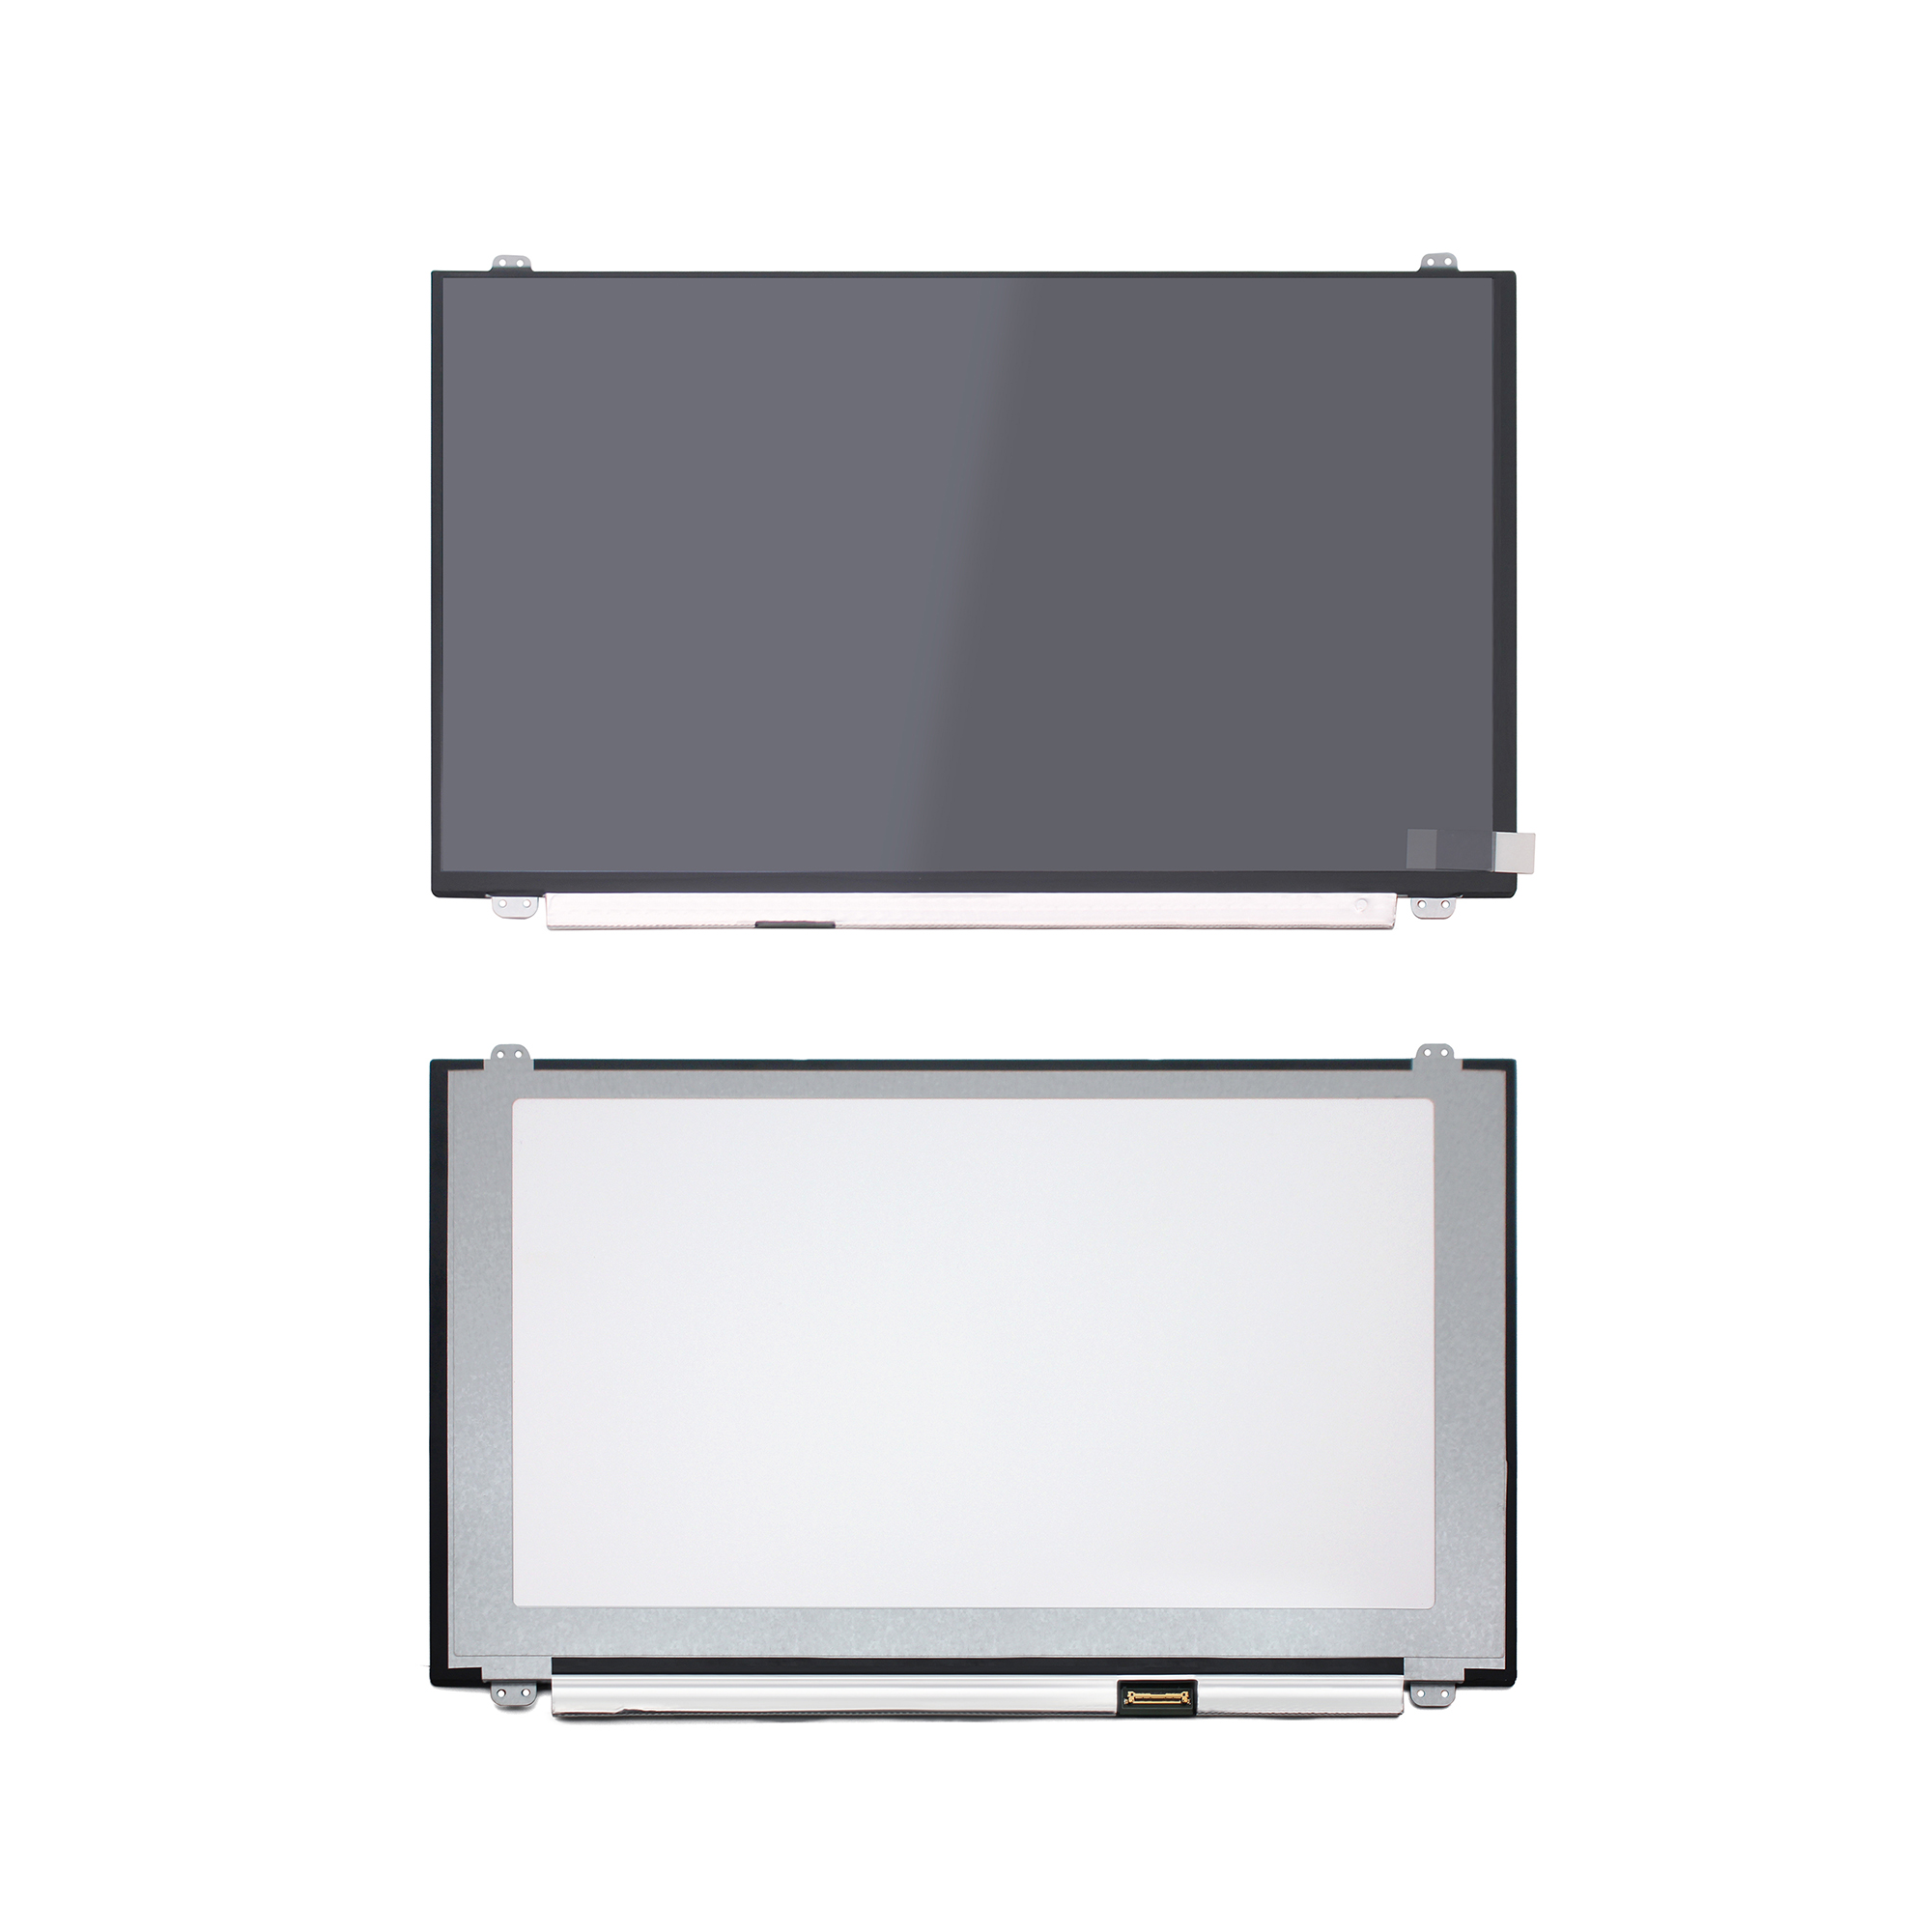 15.6''LCD Display Screen N156HHE-GA1 120Hz for DELL Inspiron 5577 7577 7567 7559 15.6''LCD Display Screen N156HHE-GA1 120Hz for DELL Inspiron 5577 7577 7567 7559